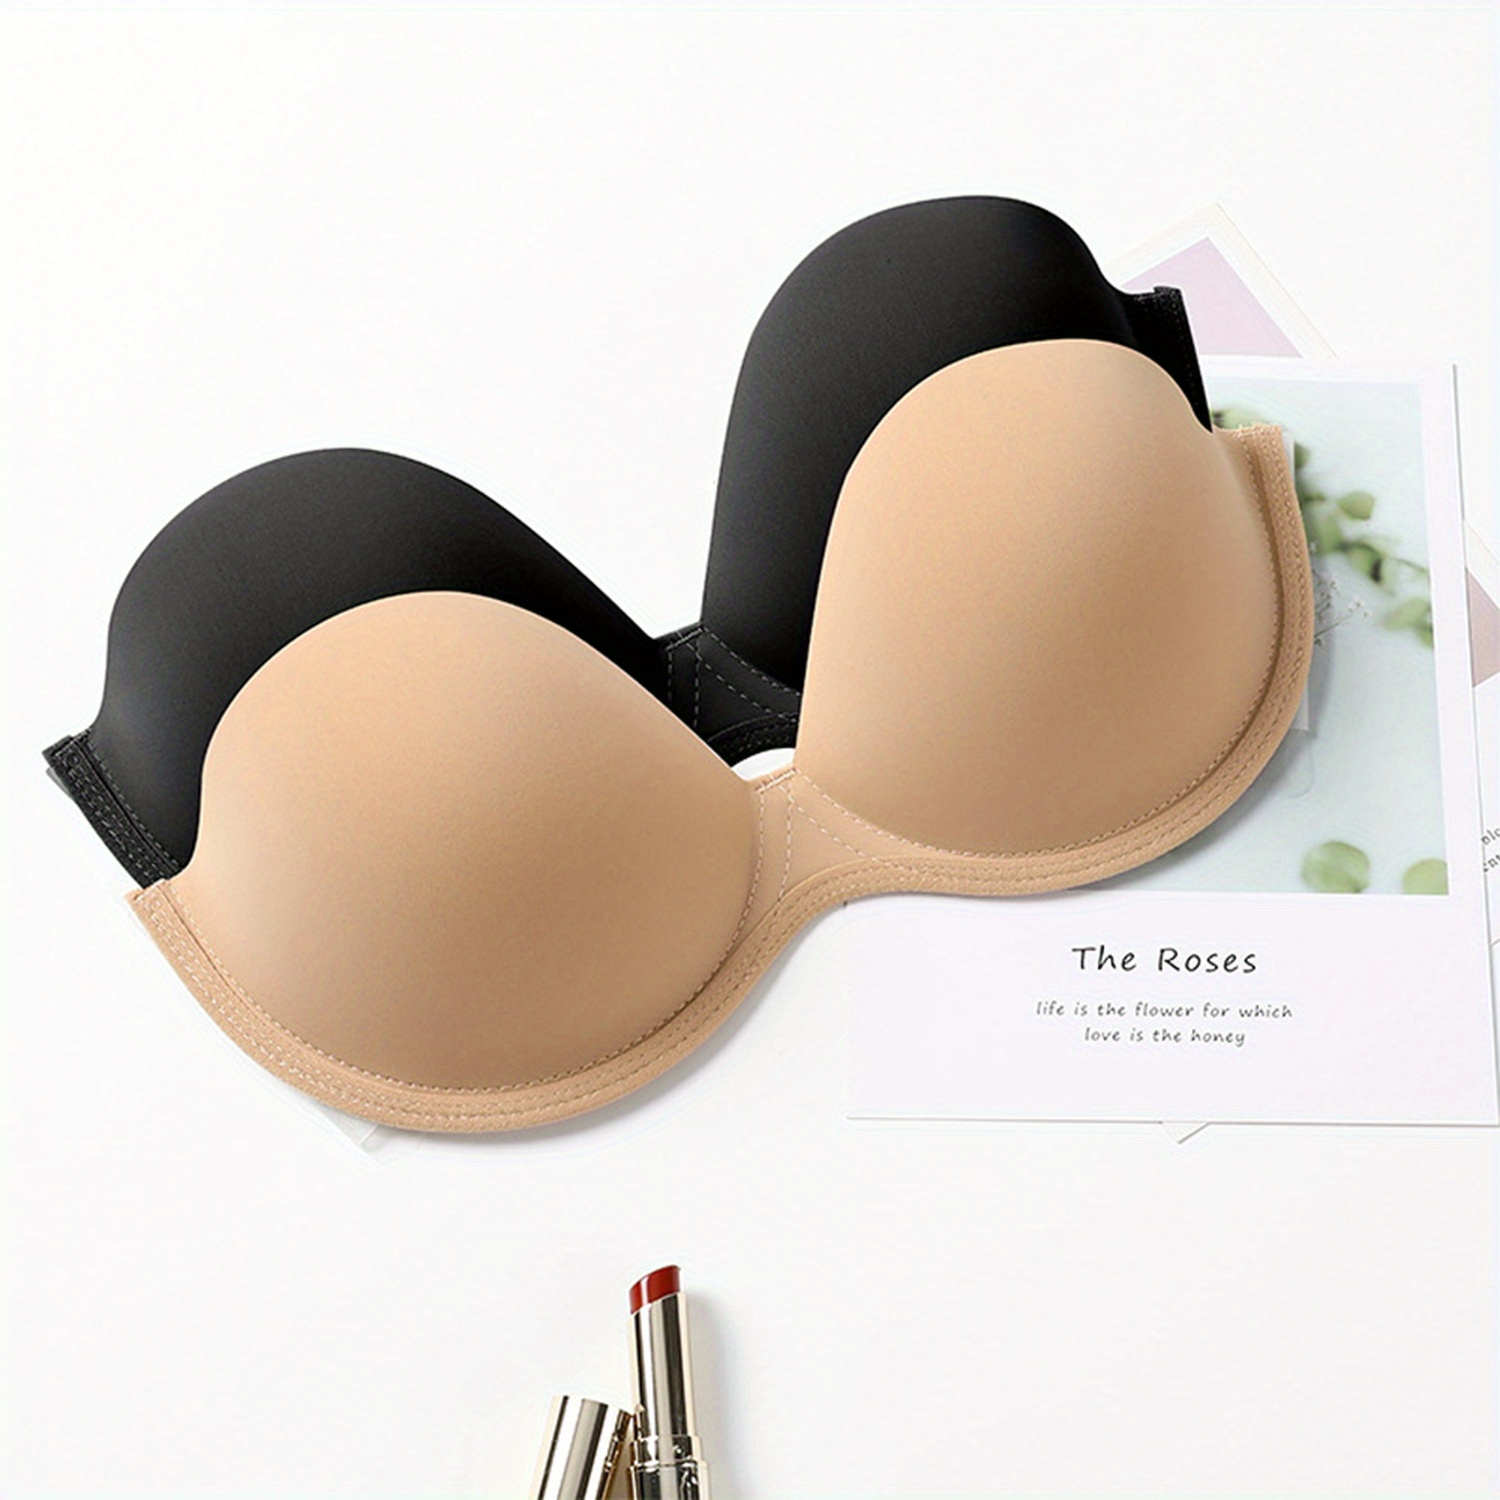 Adhesive Bra Strapless Adhesive Invisible Push Up Silicone Bra For